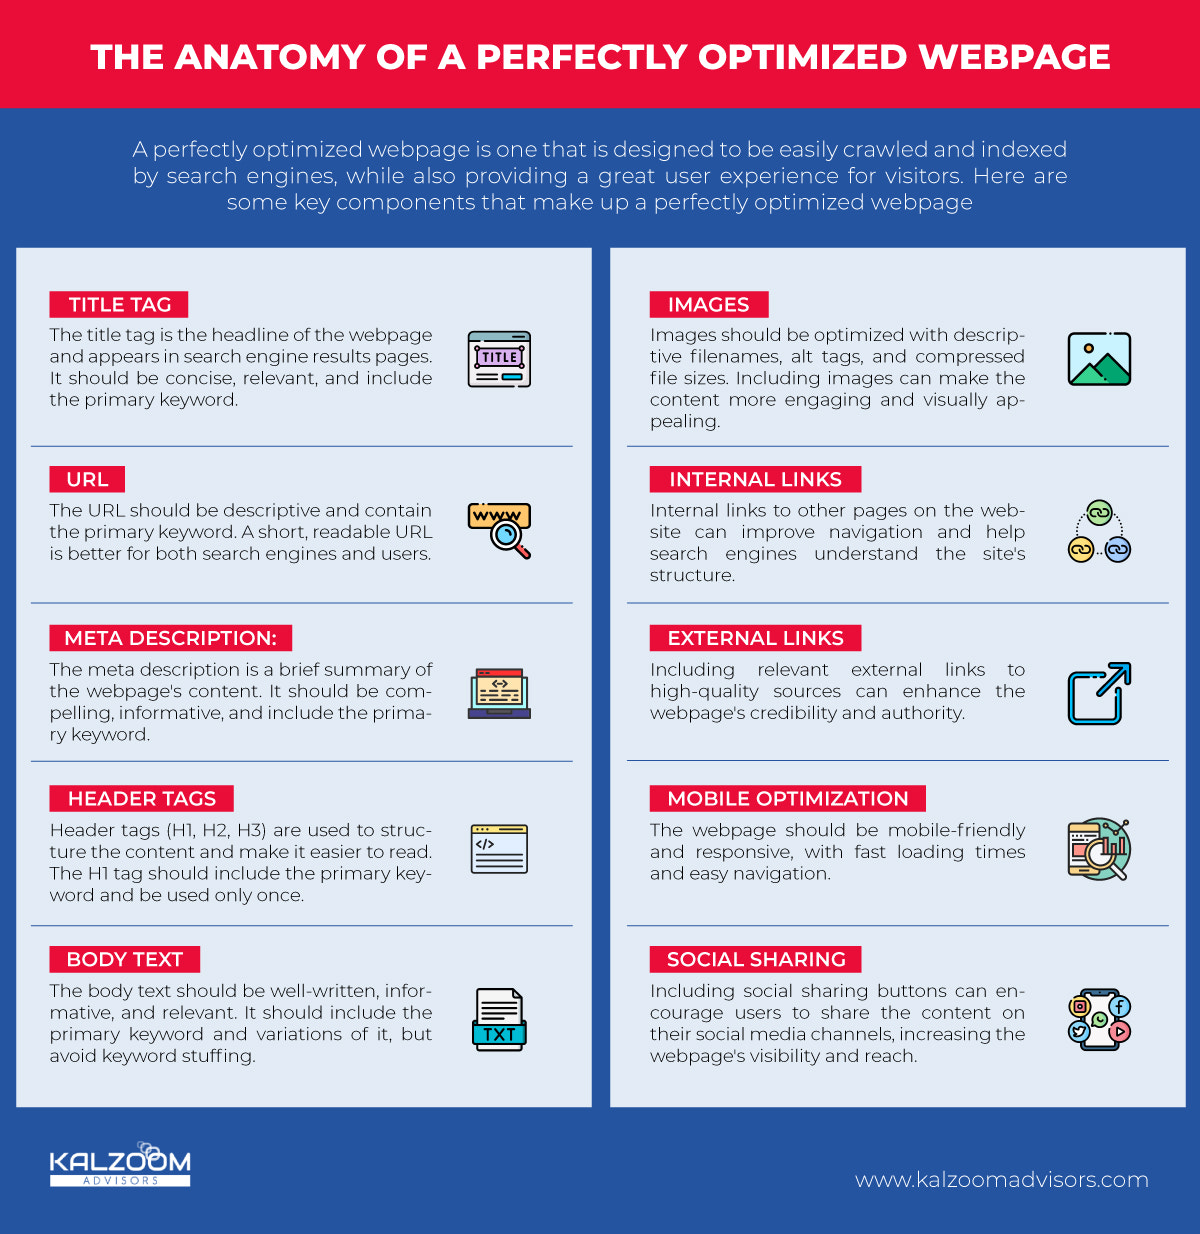 The Anatomy of a Perfectly Optimized Webpage